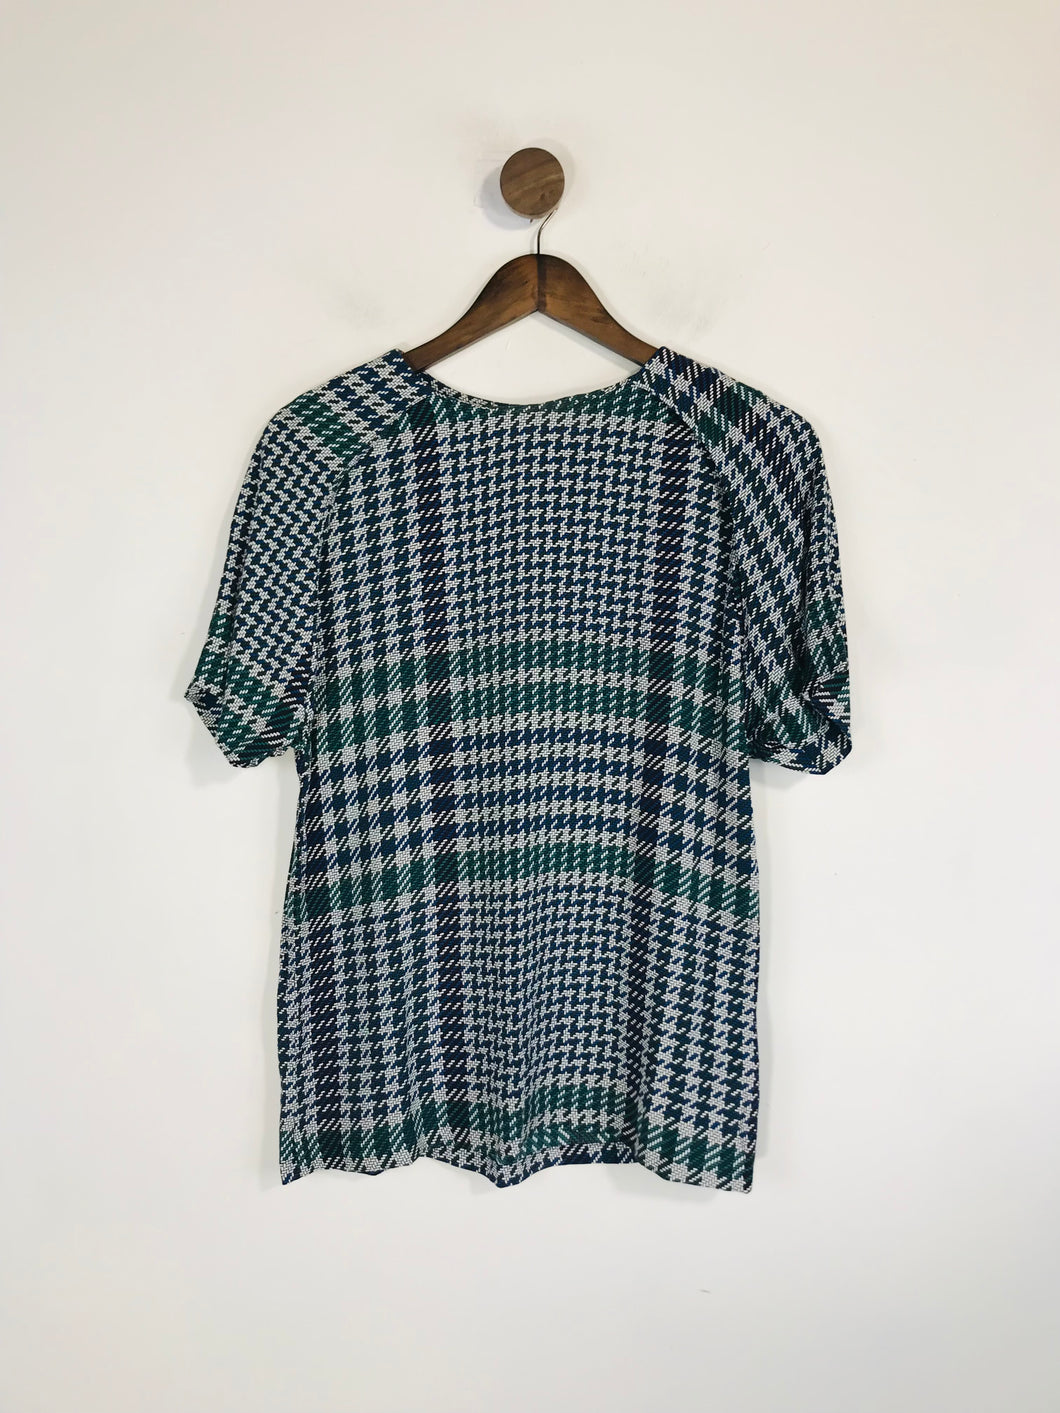 & Other Stories Women's Check Gingham Blouse | EU34 UK6 | Multicoloured